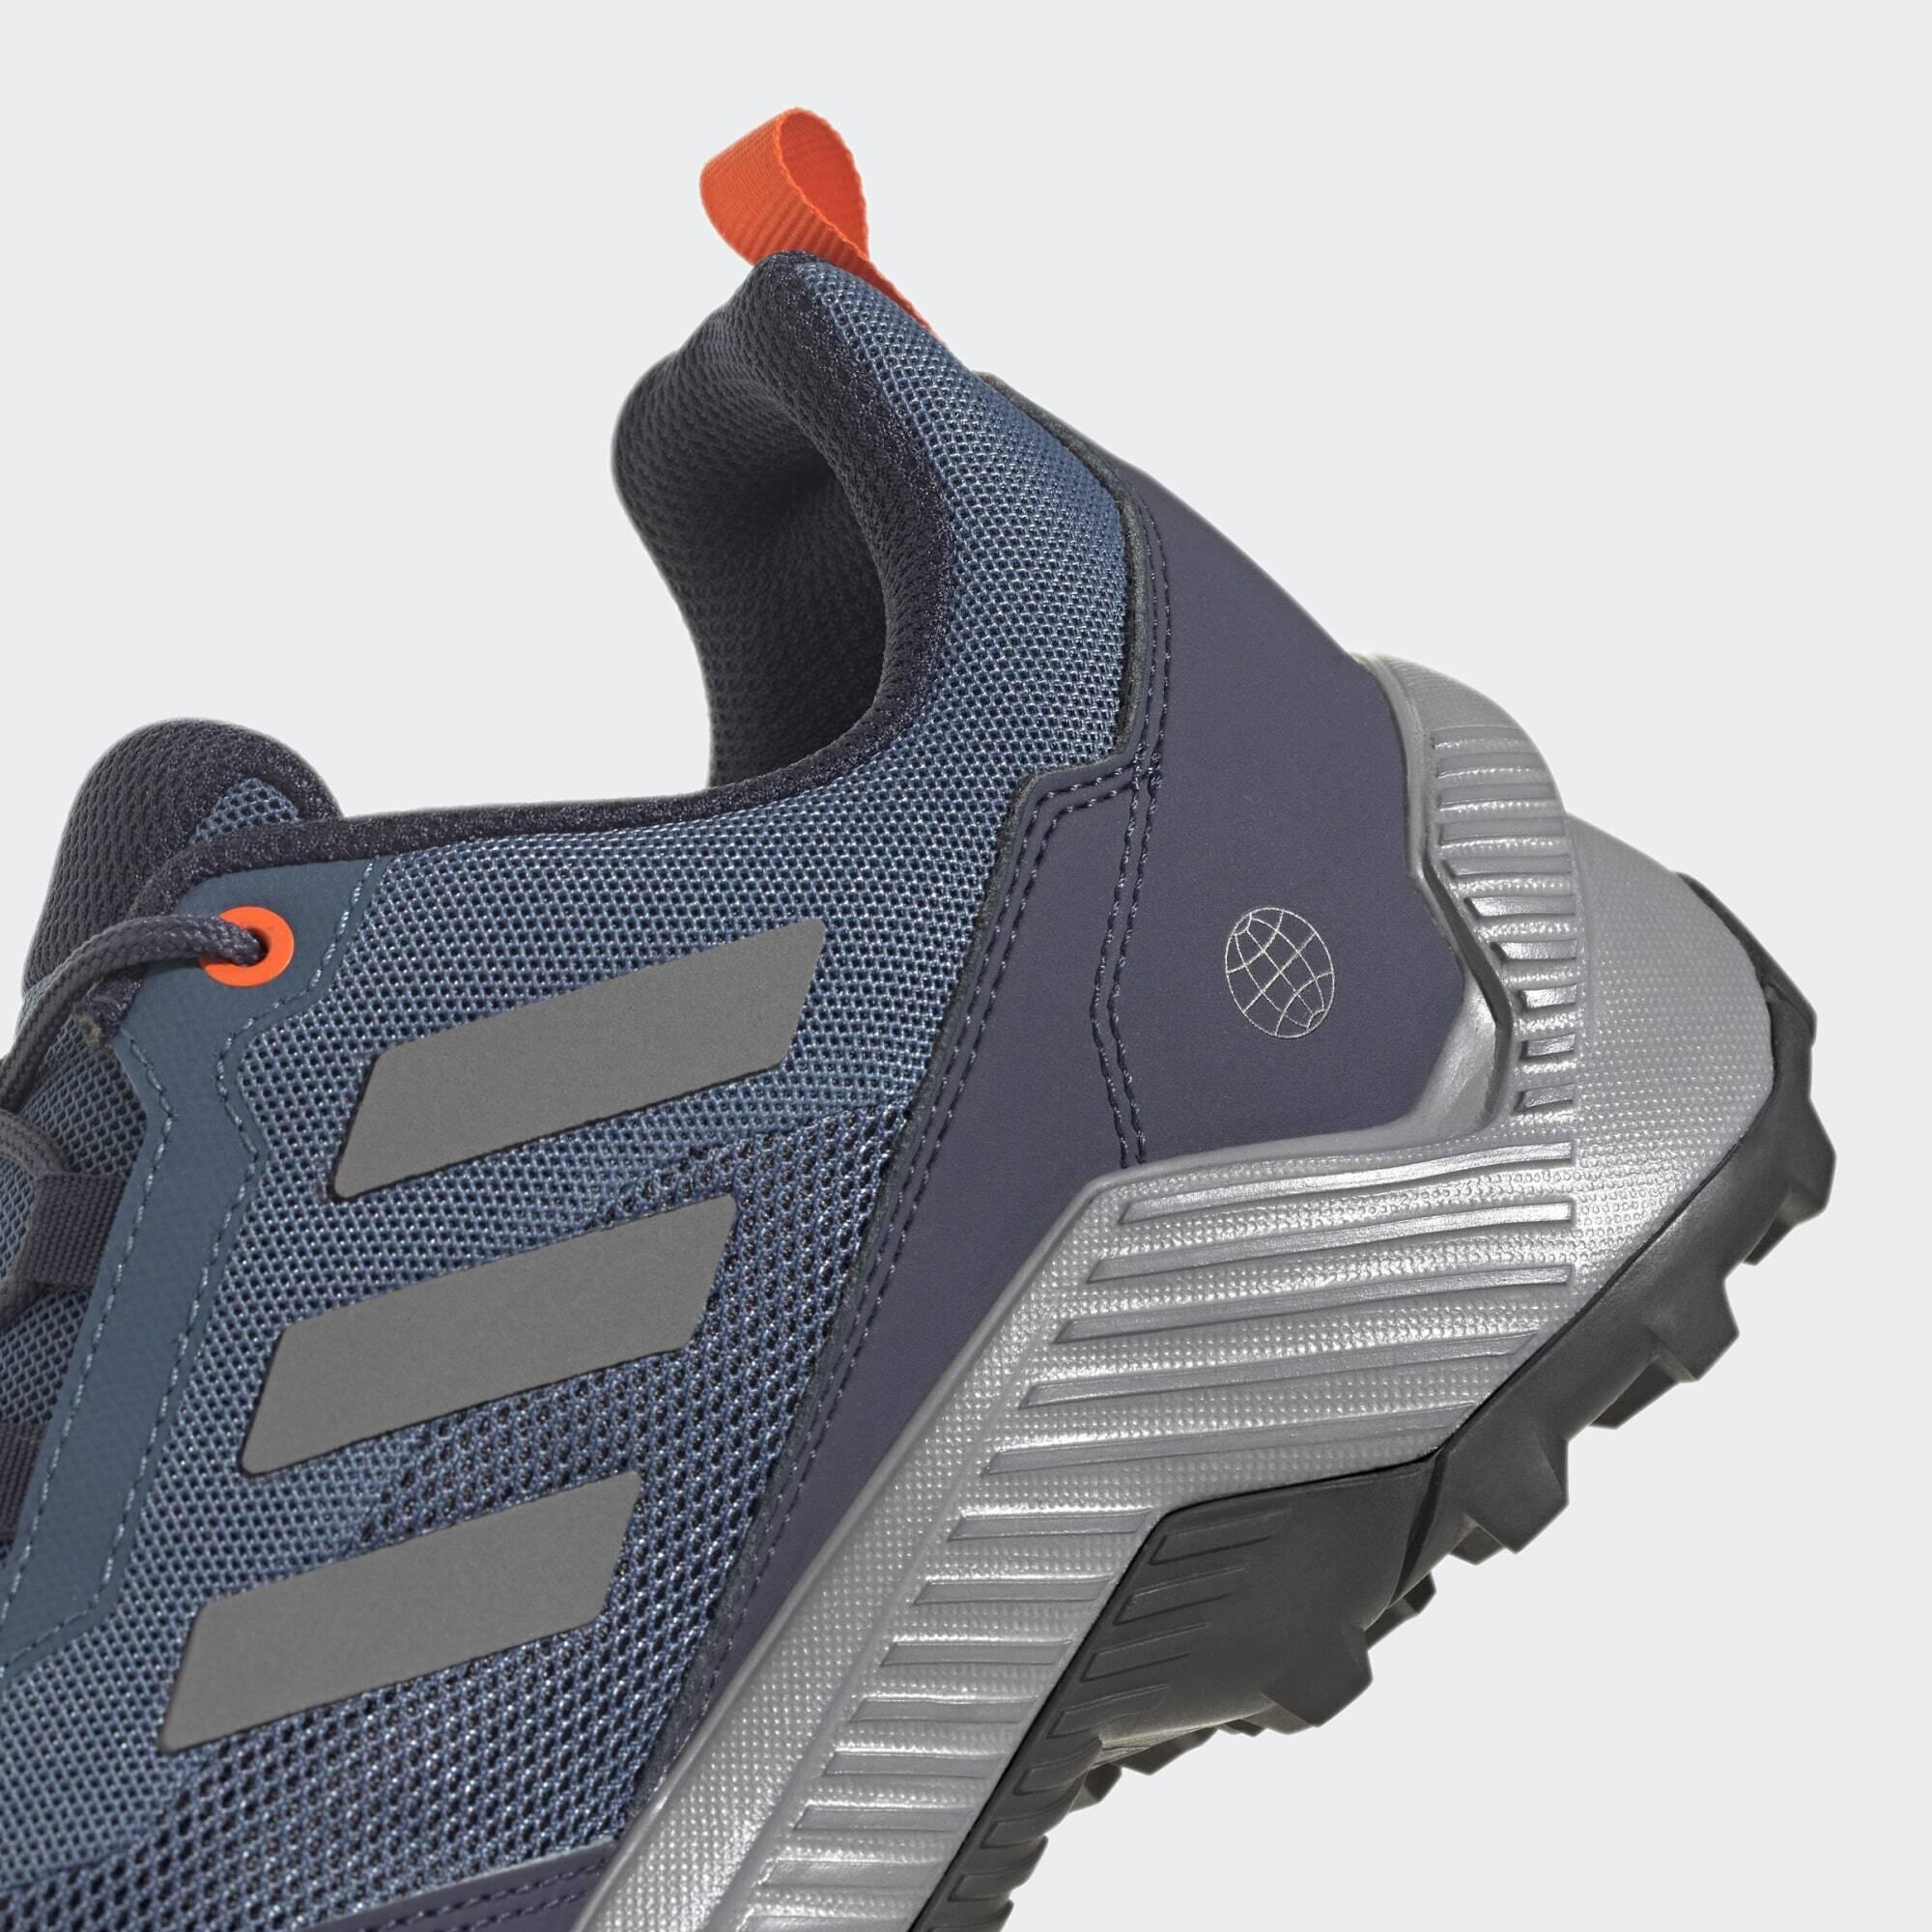 Eastrail 2.0 Hiking Shoes 7/7